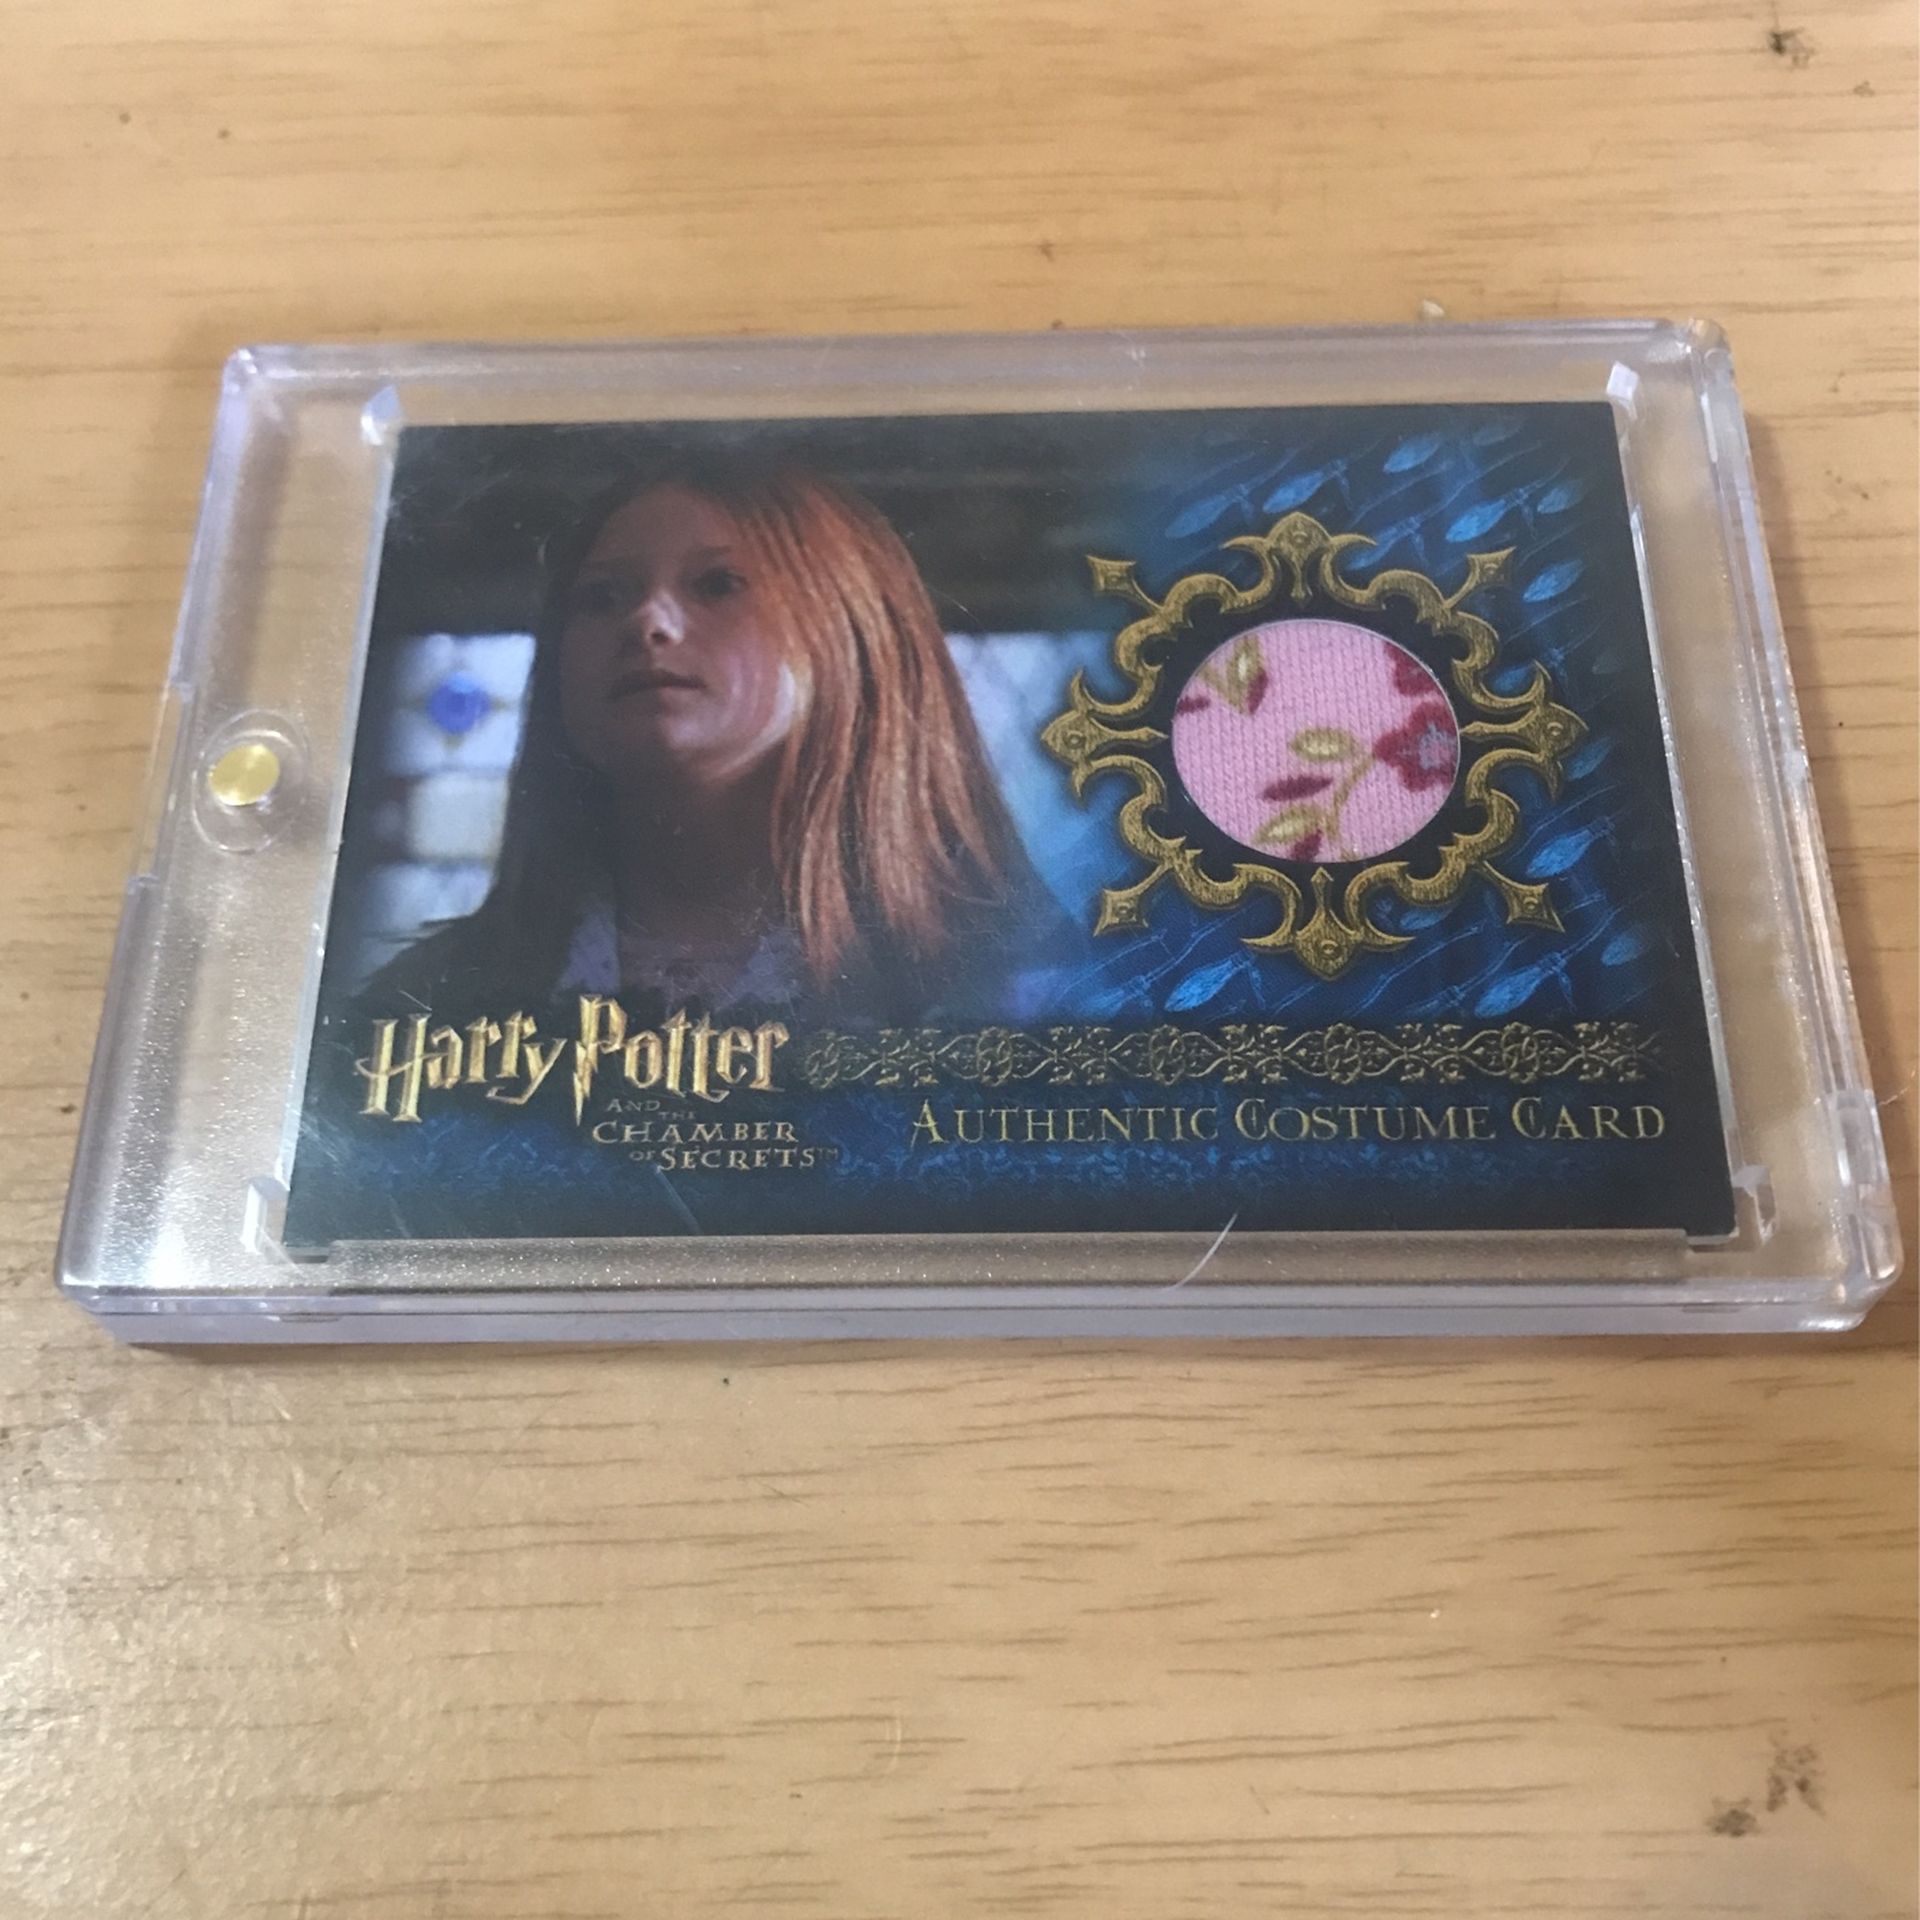 Harry Potter Authentic Costume Card # 243 / 340